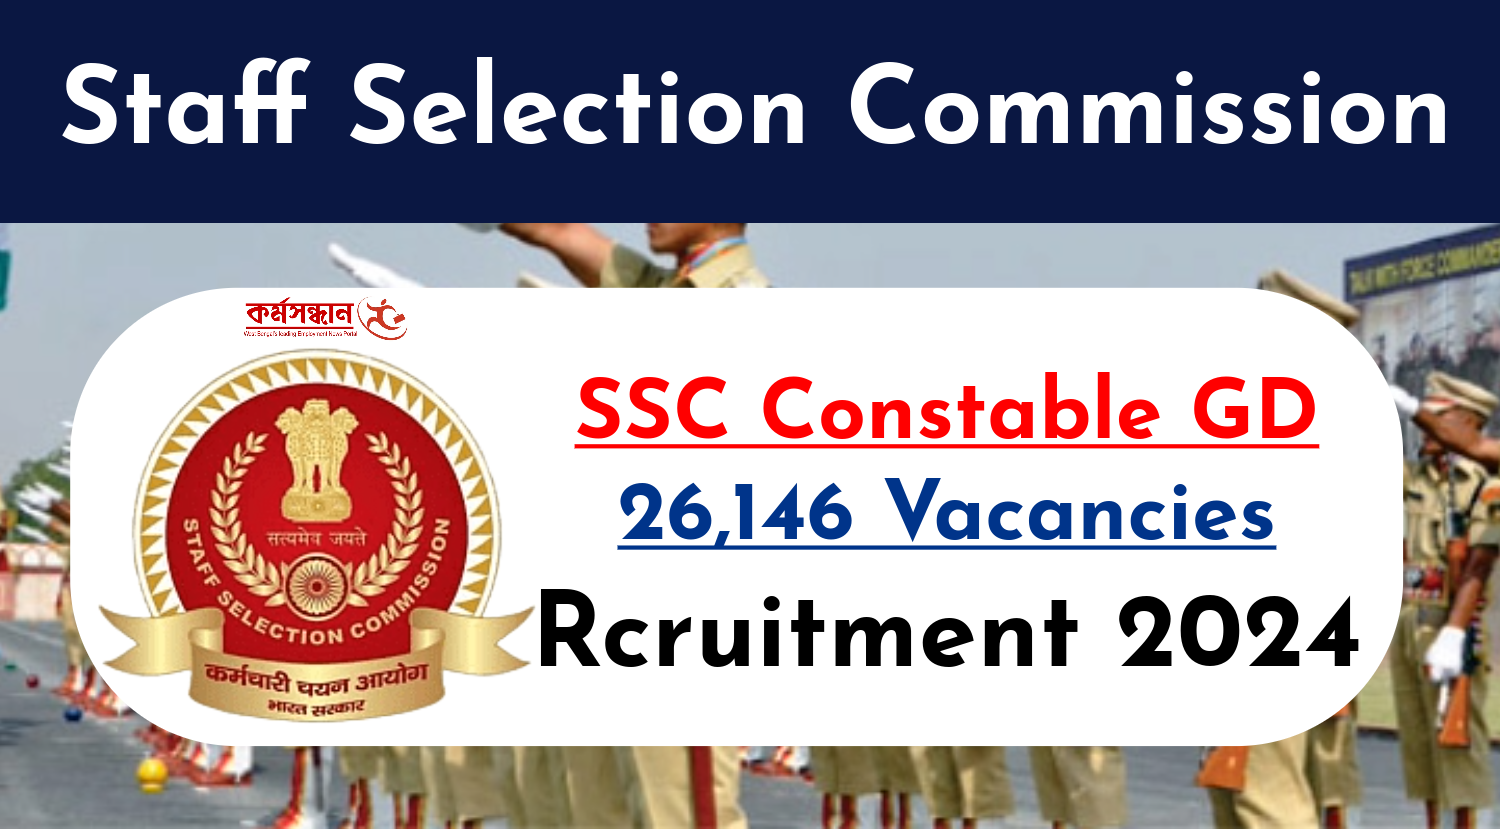 SSC Constable GD 2024 Application Starts for 26,146 Vacanc